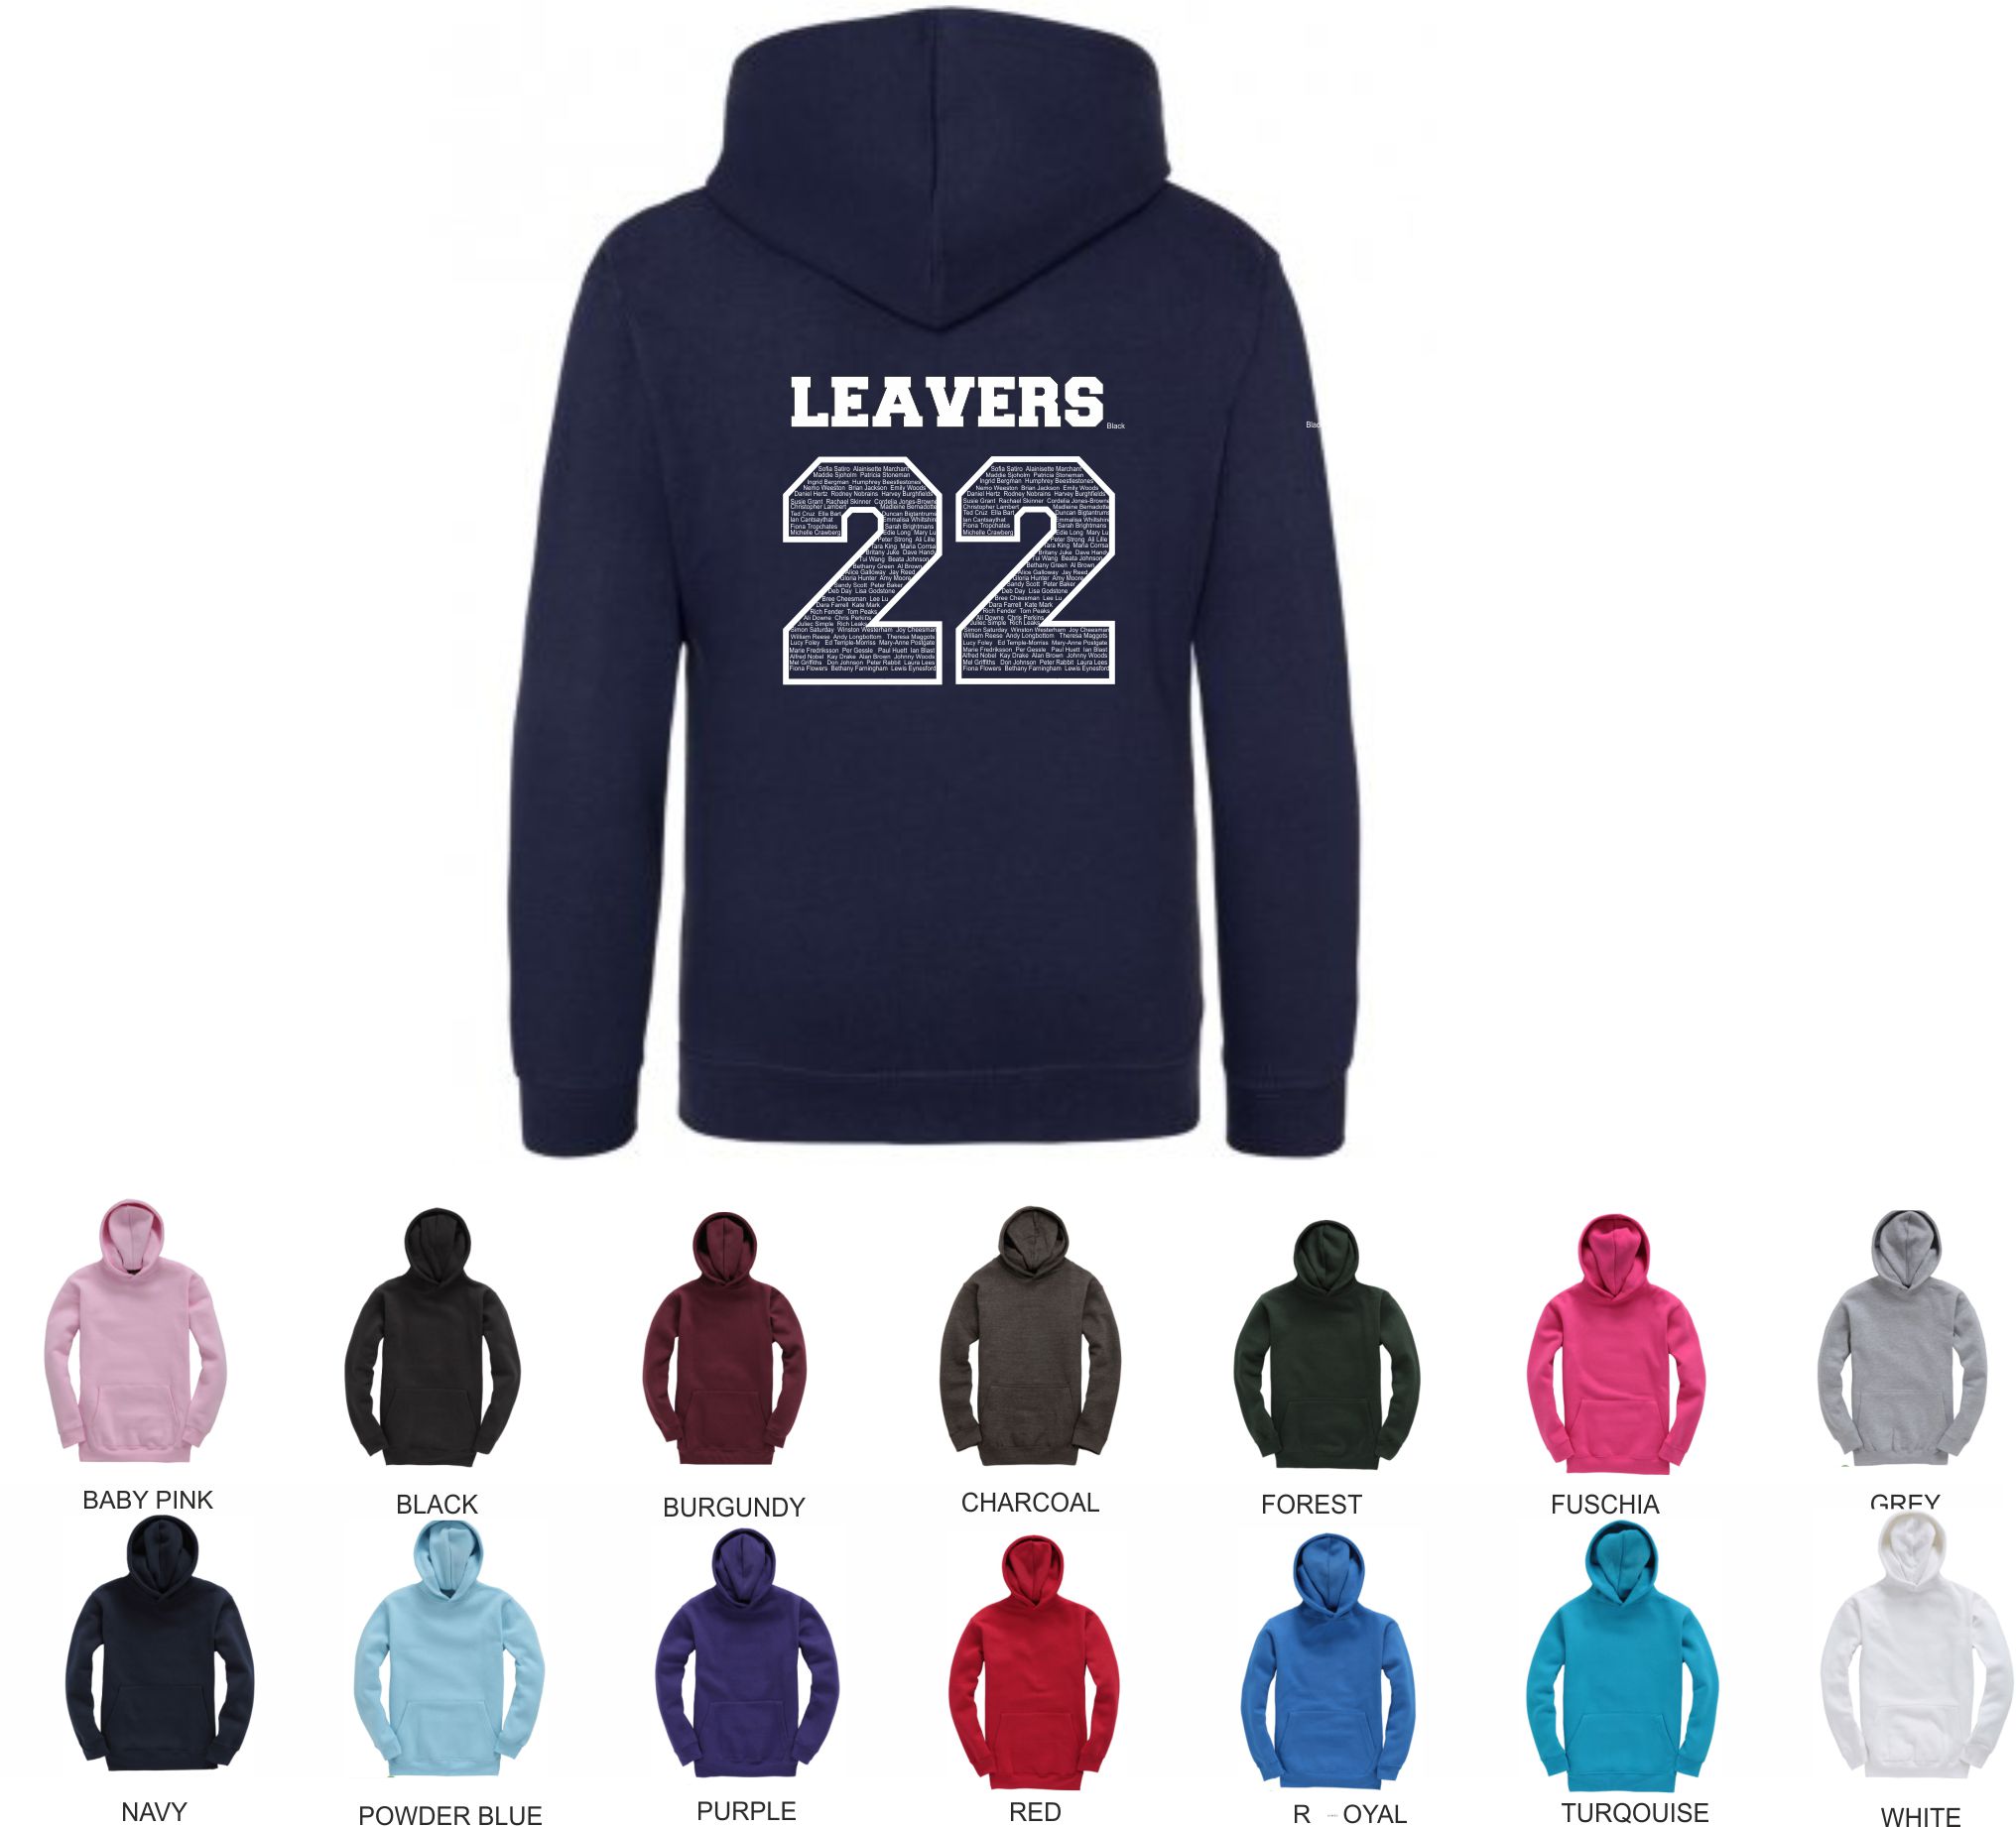 No Frills Senior Budget Leavers Hood prices from £12.75 + vat